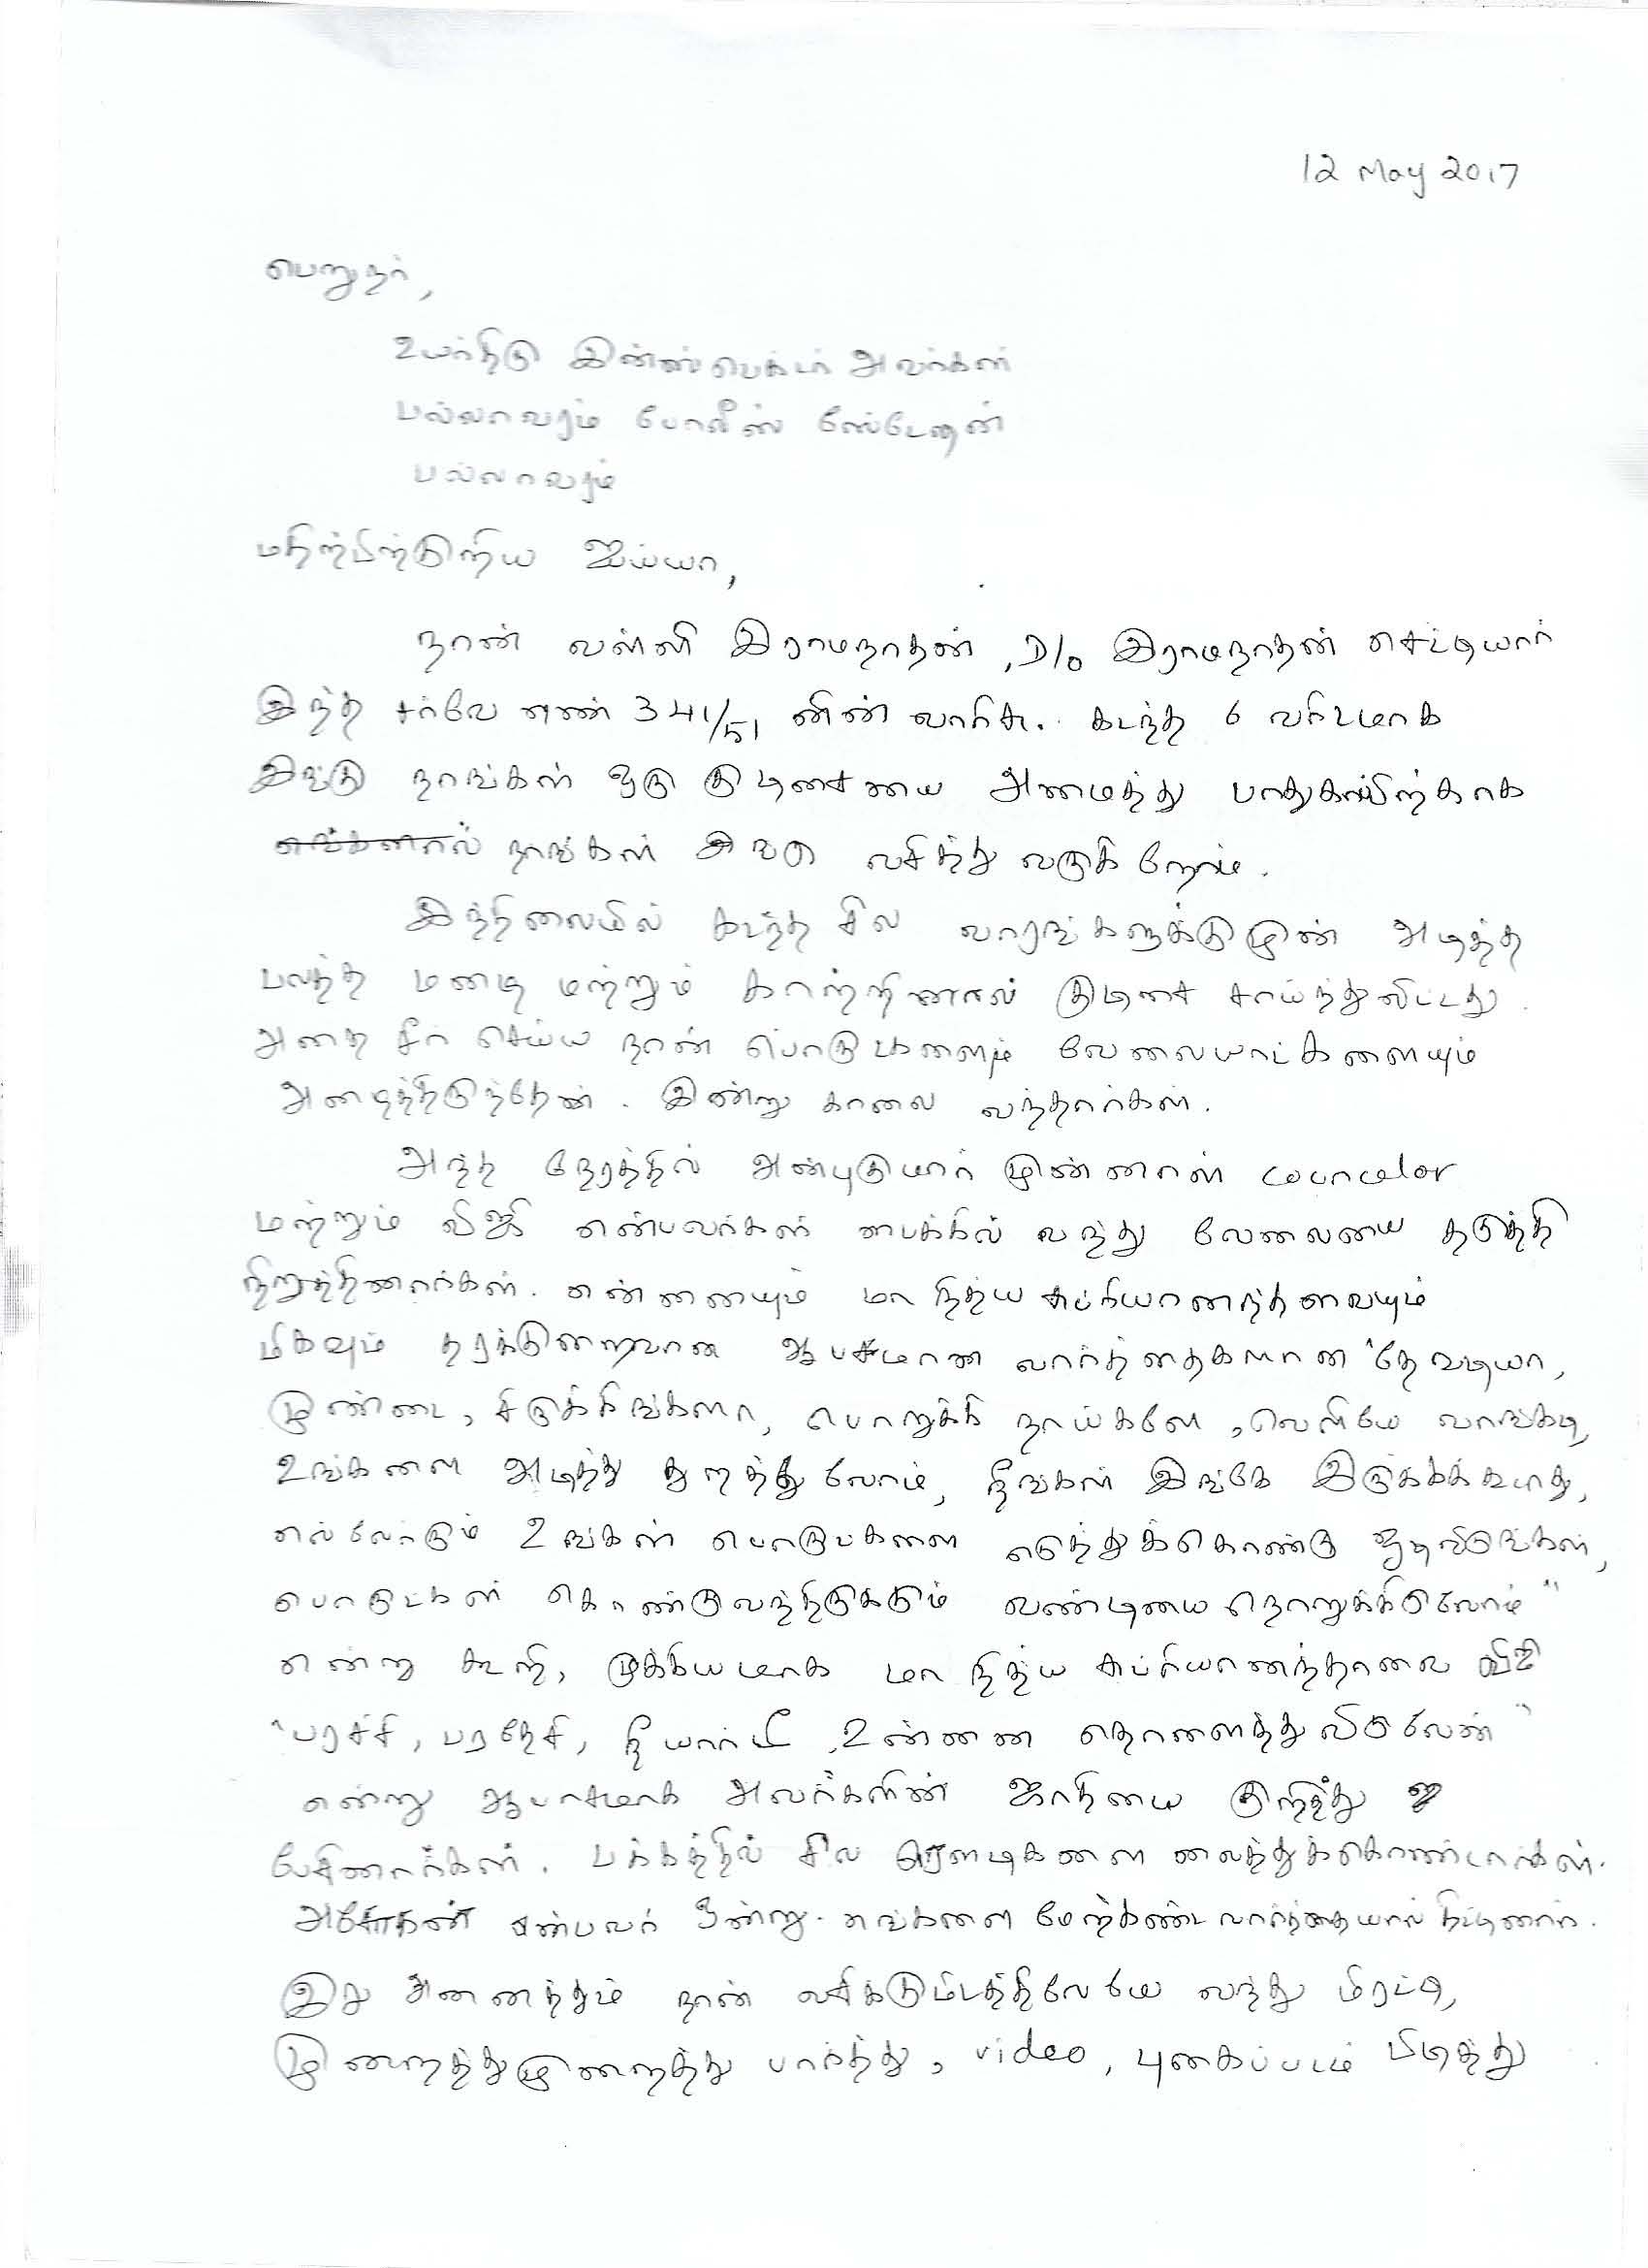 Bakthika Swami Complaint 12 May 2017_Page_1